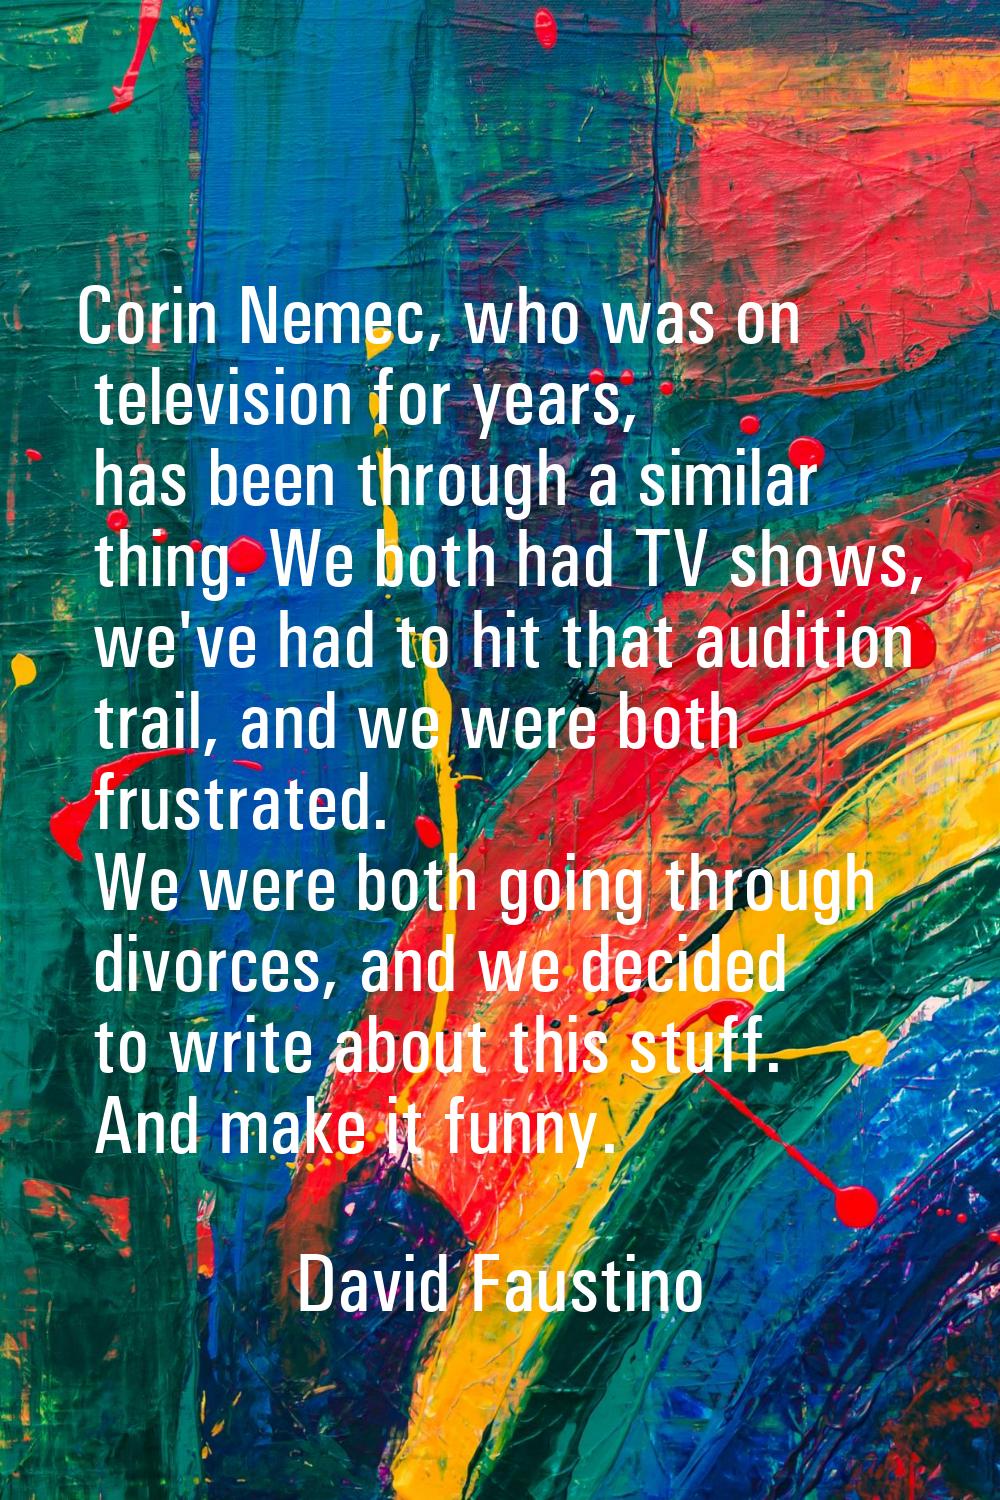 Corin Nemec, who was on television for years, has been through a similar thing. We both had TV show